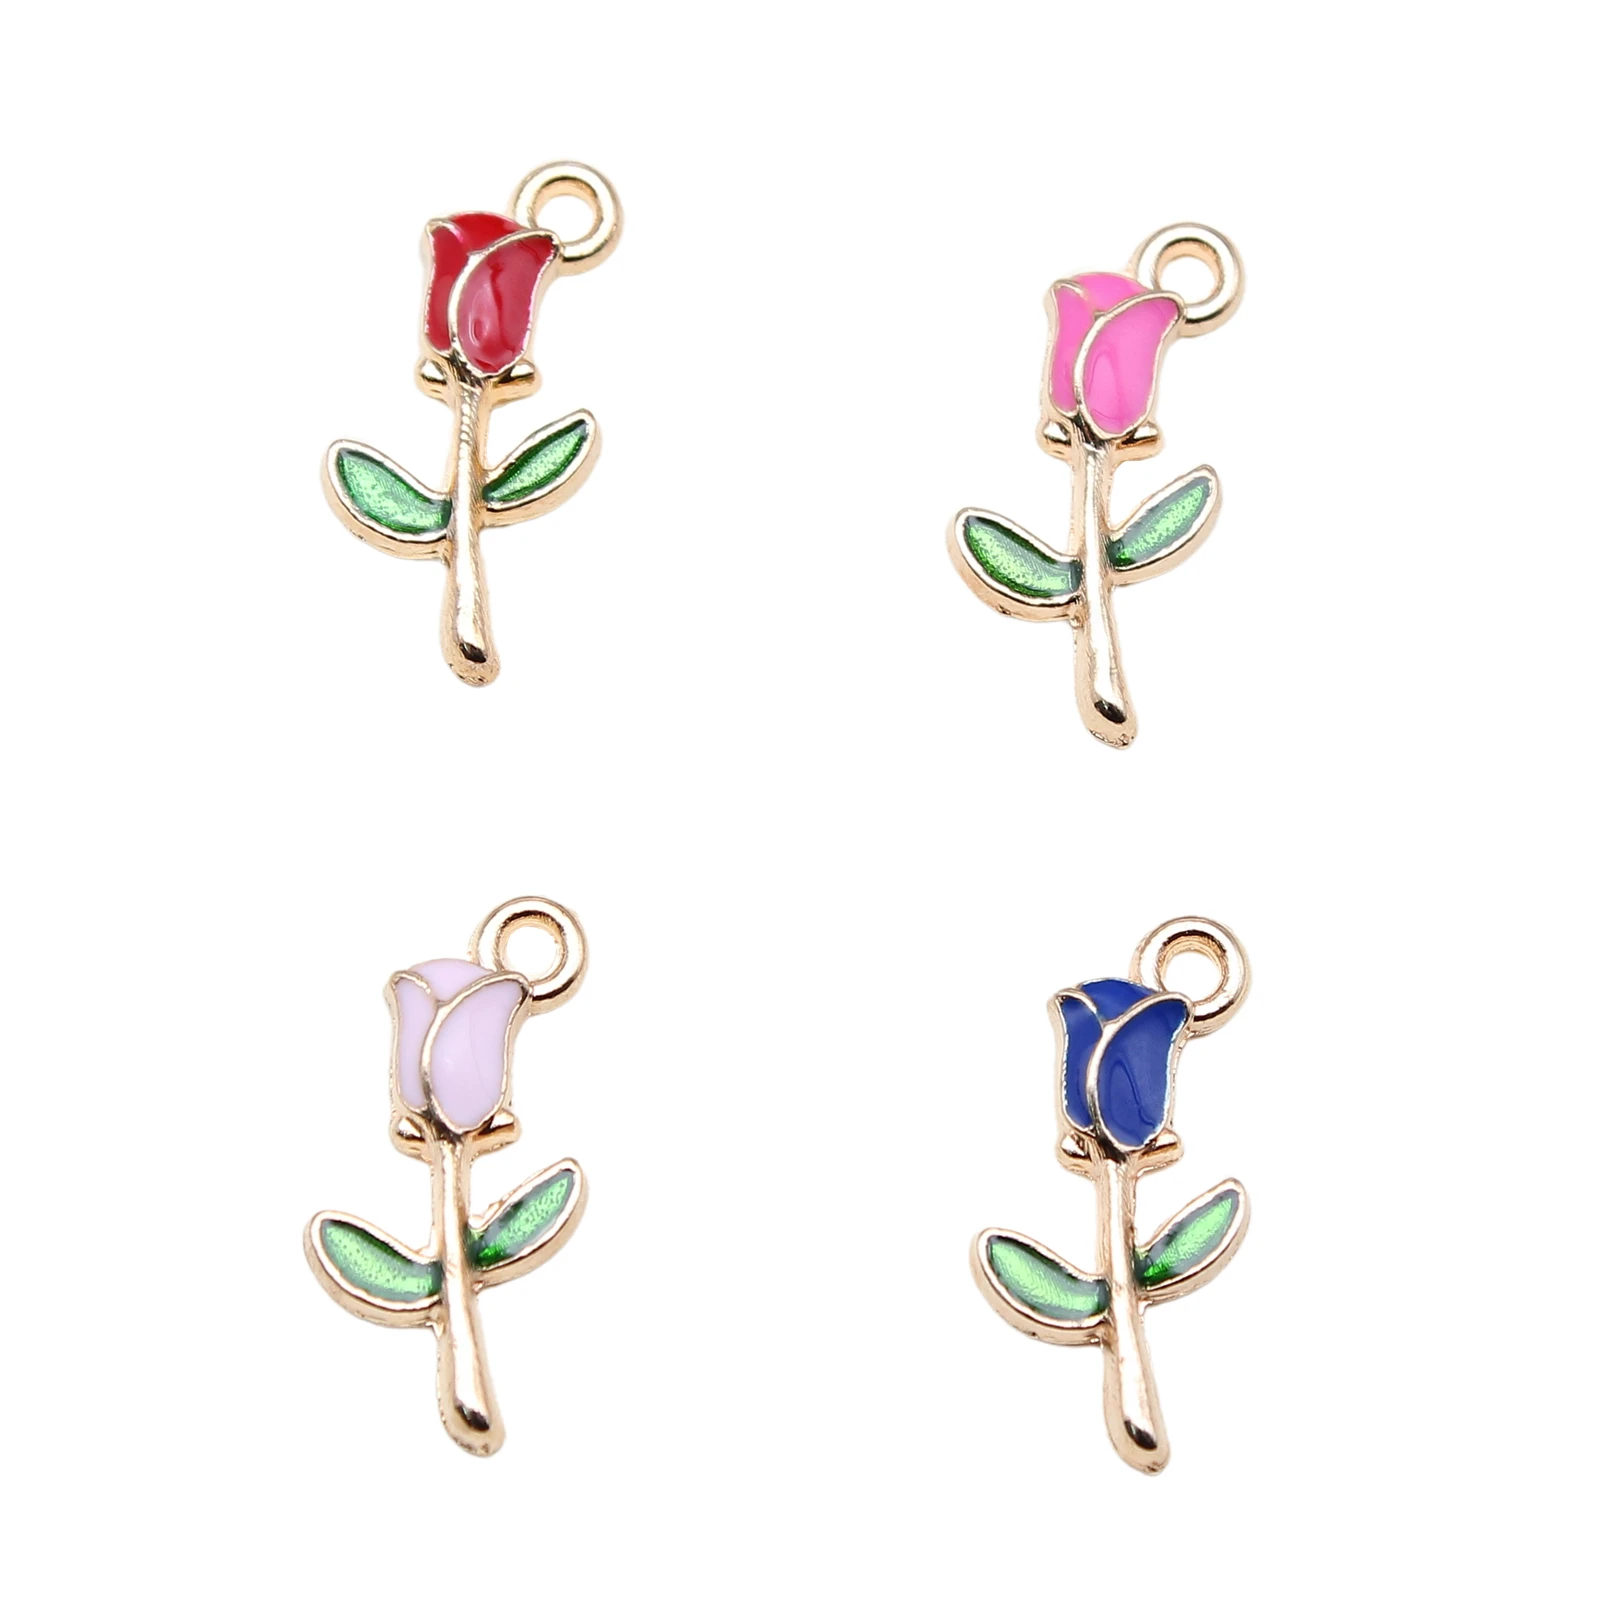 

WYSIWYG 10pcs 18x9mm 4 Colors Enamel Rose Charms Pendant For DIY Jewelry Making Handmade Jewelry Craft Findings